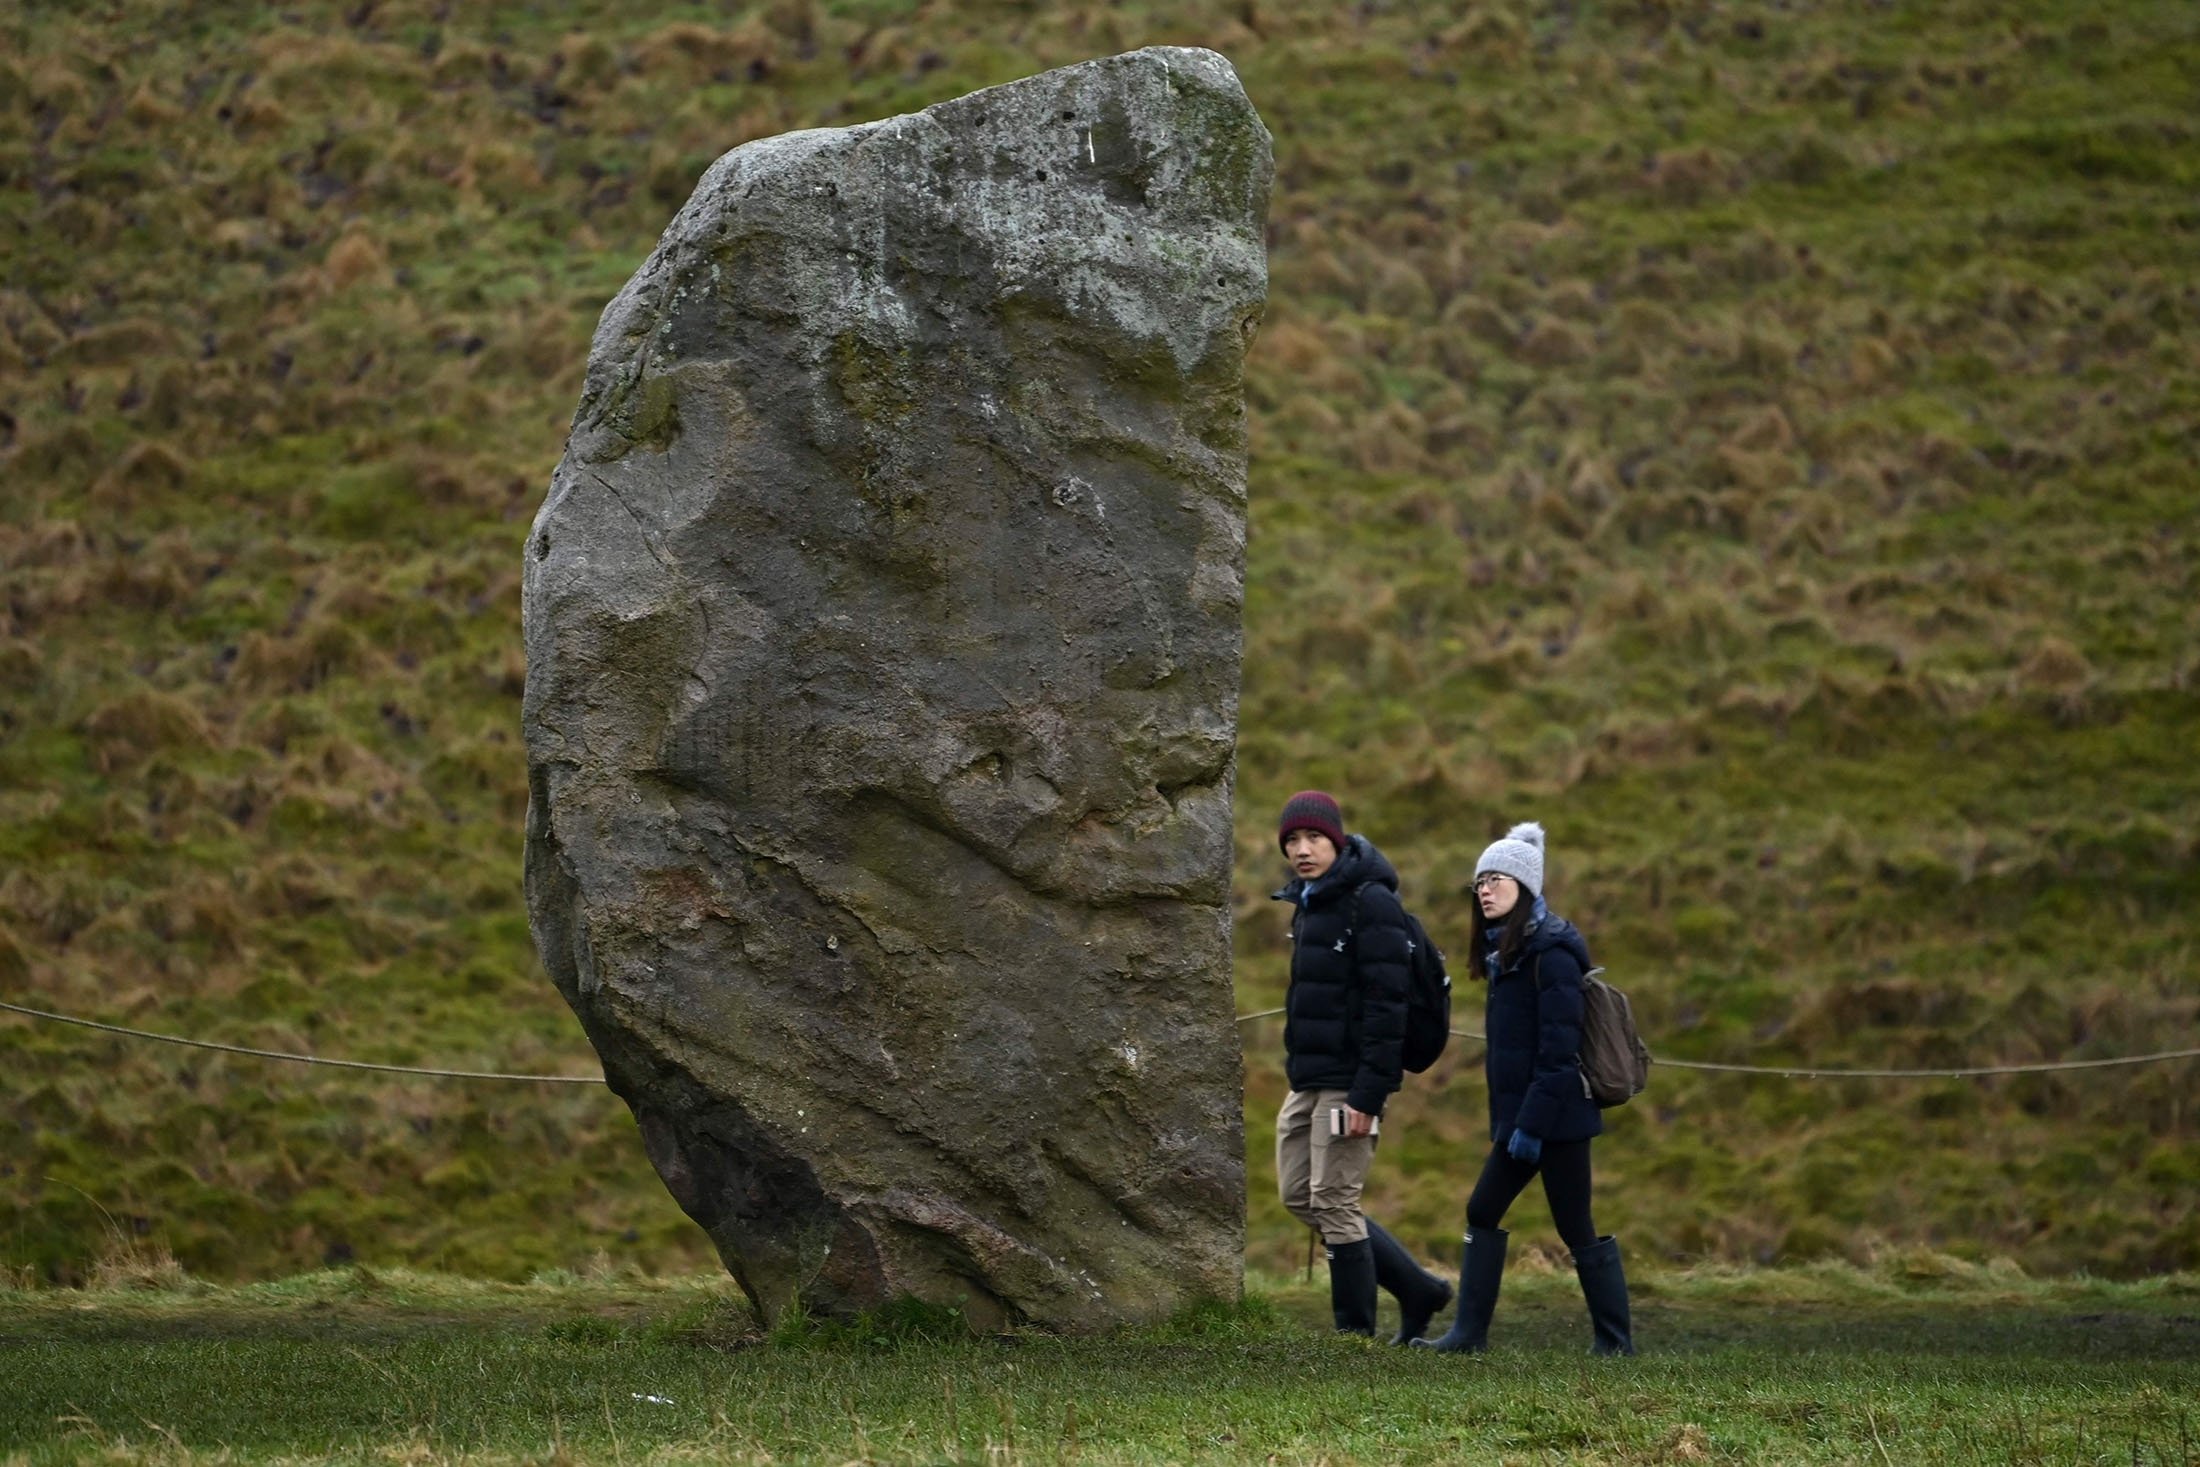 People walk past a stone that fomrms part of the Stone Circle in Avebury, southern England, Jan. 19, 2022. (AFP Photo)